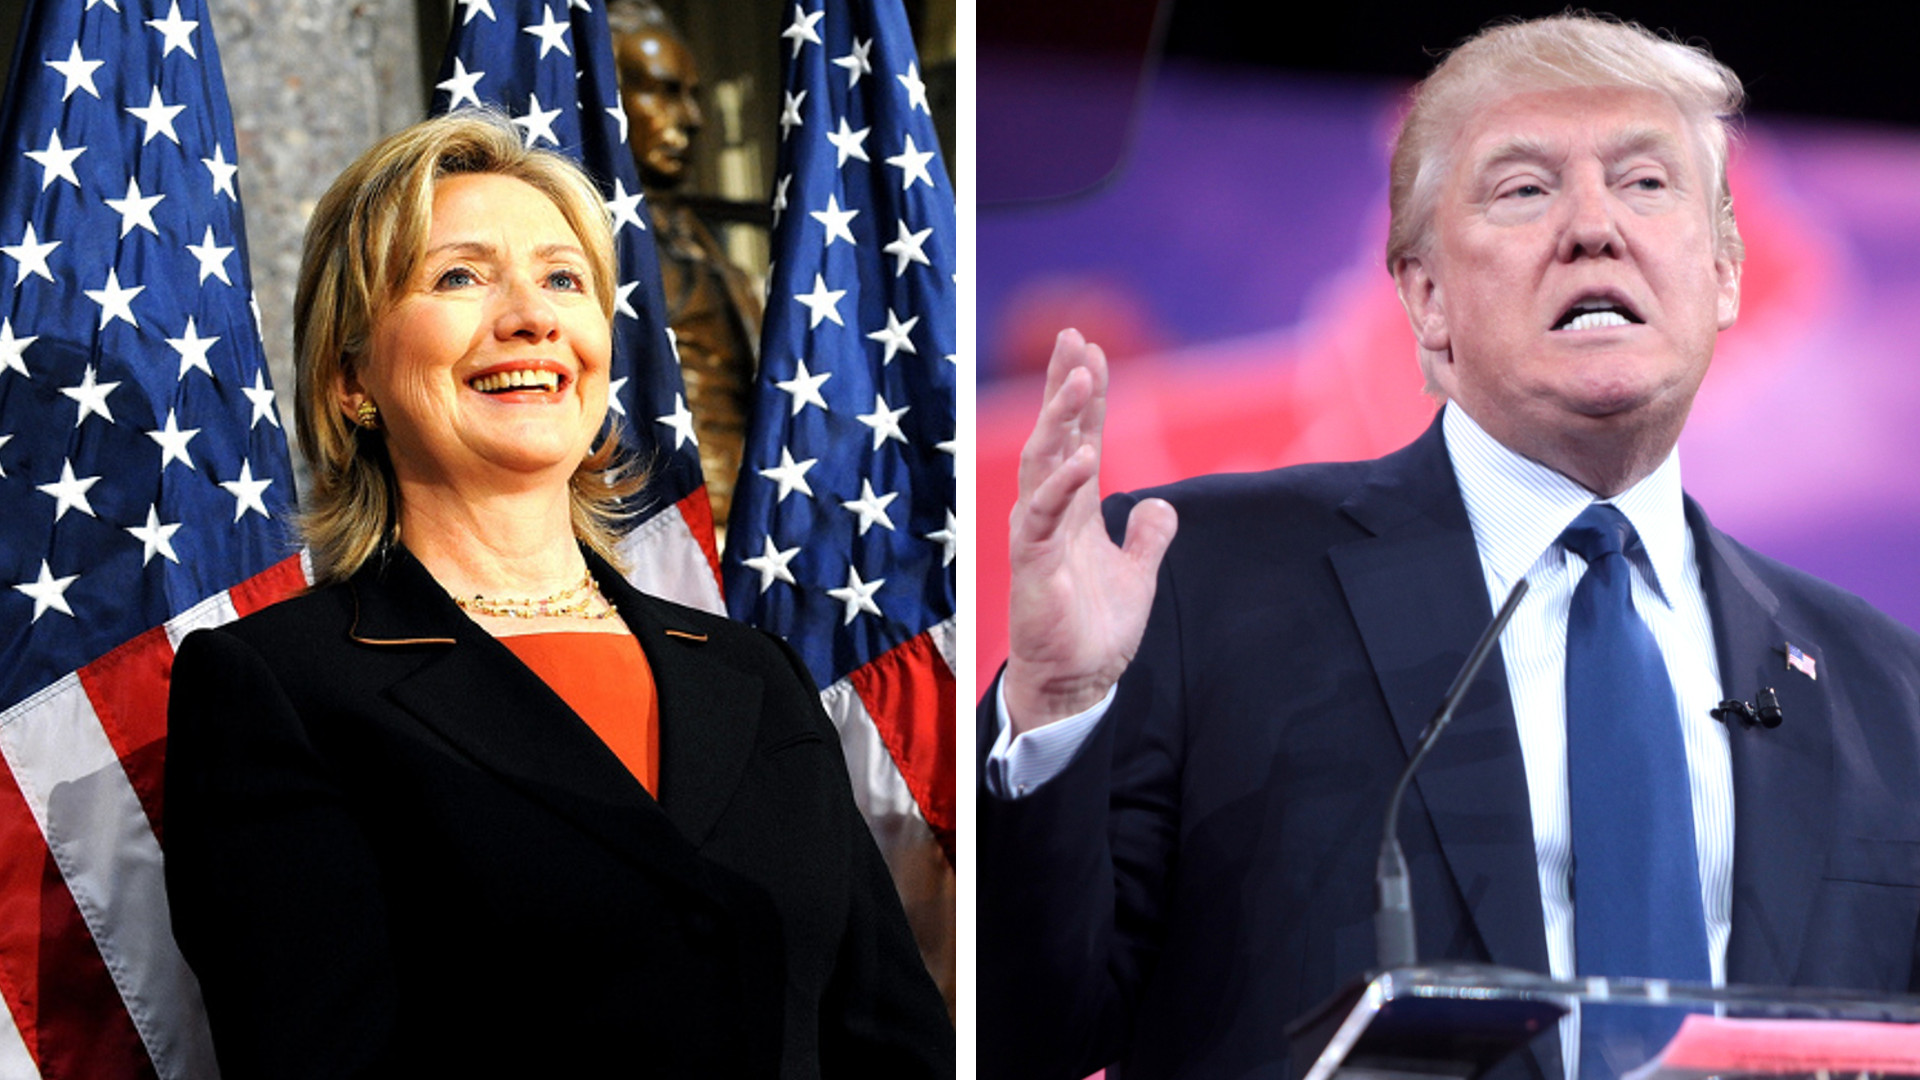 Seven important things to look for in the first presidential debat